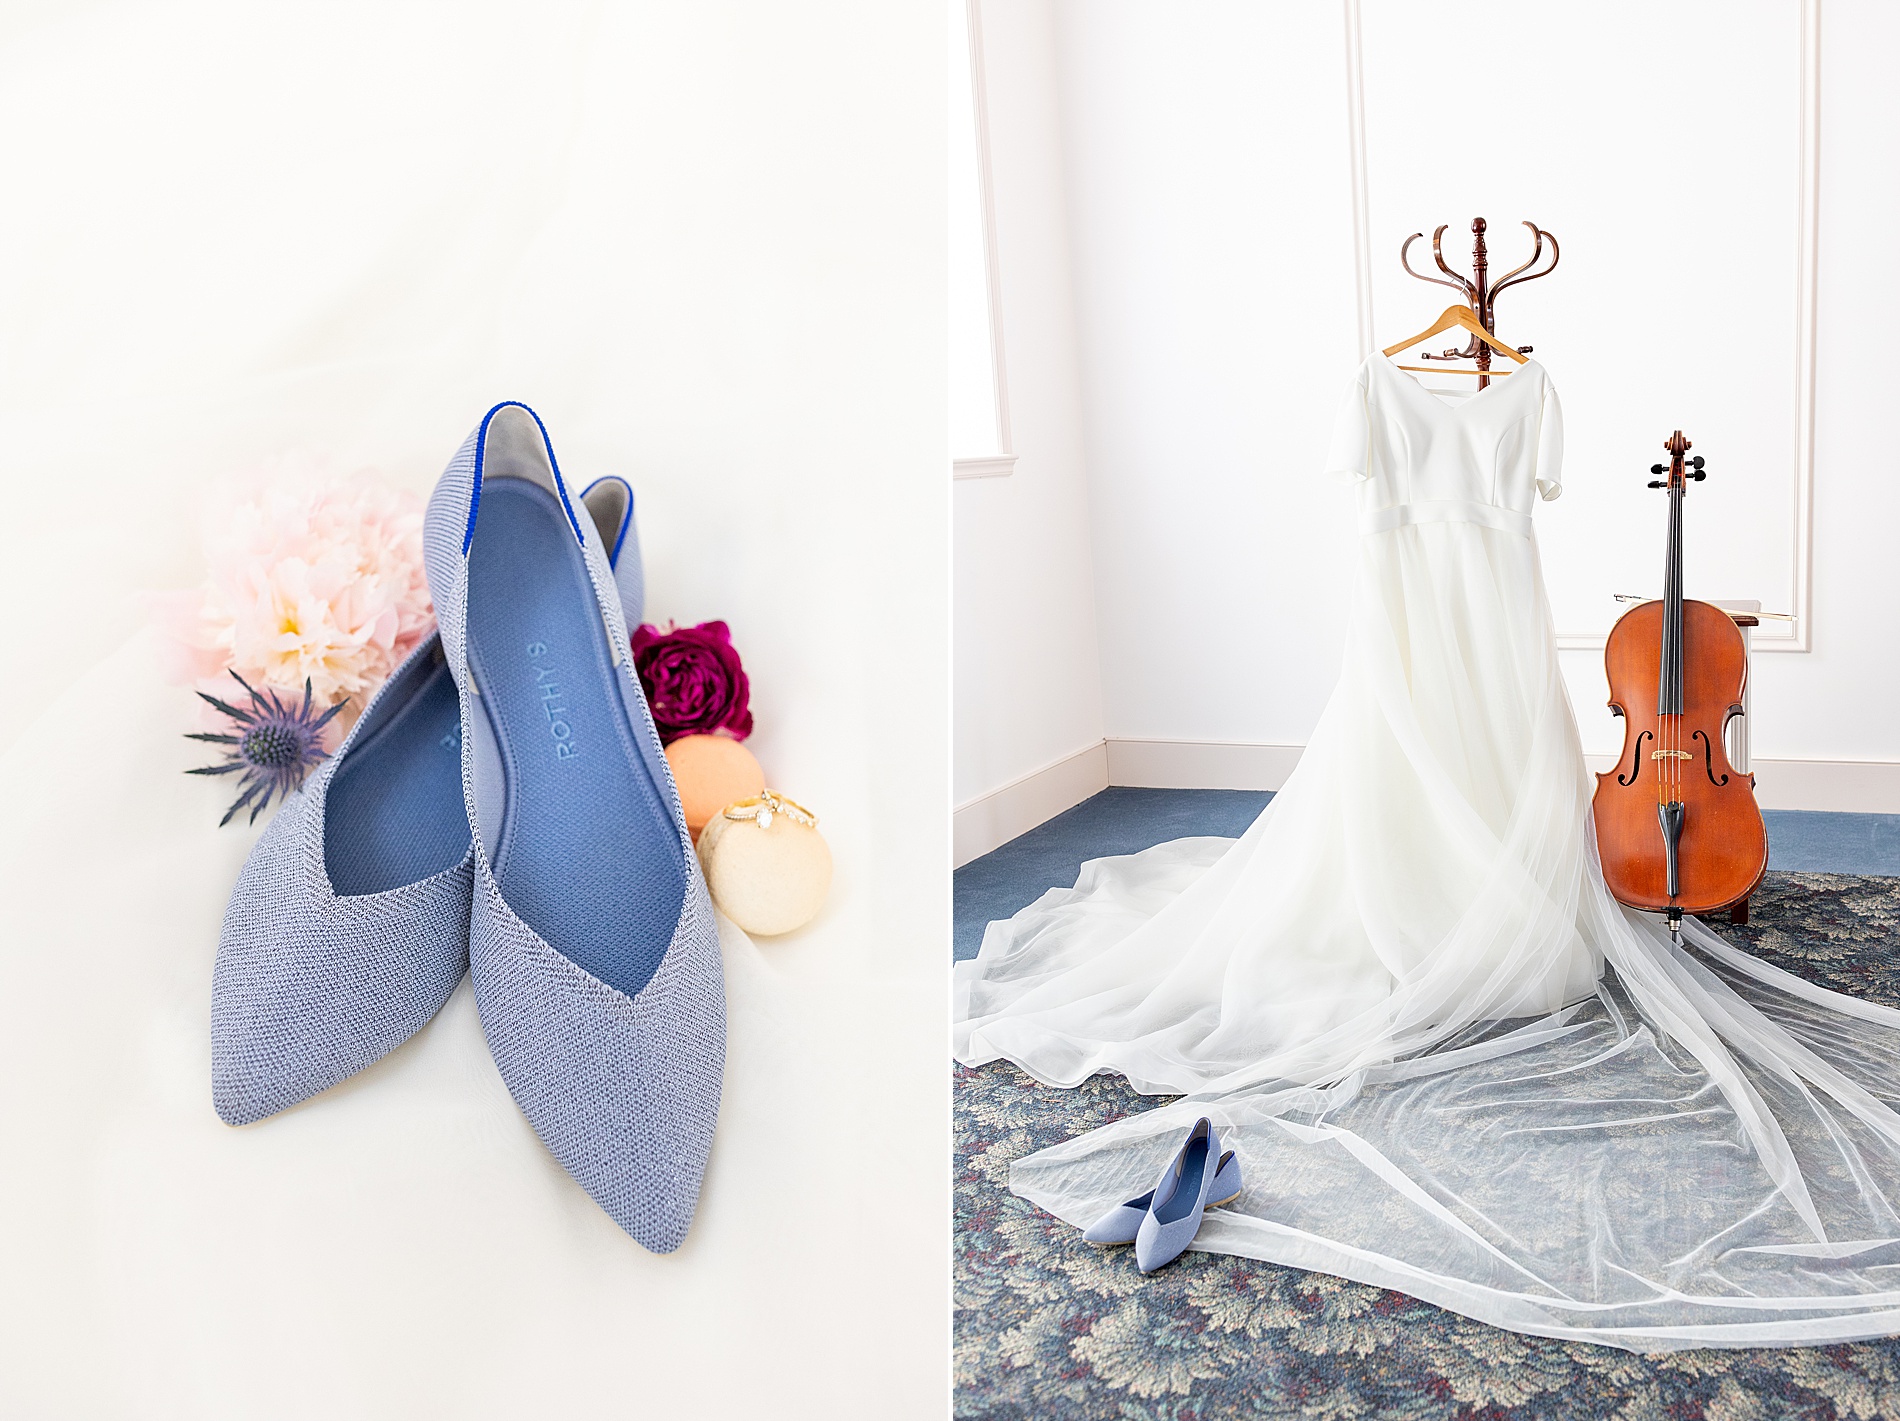 bride's wedding dress and shoes